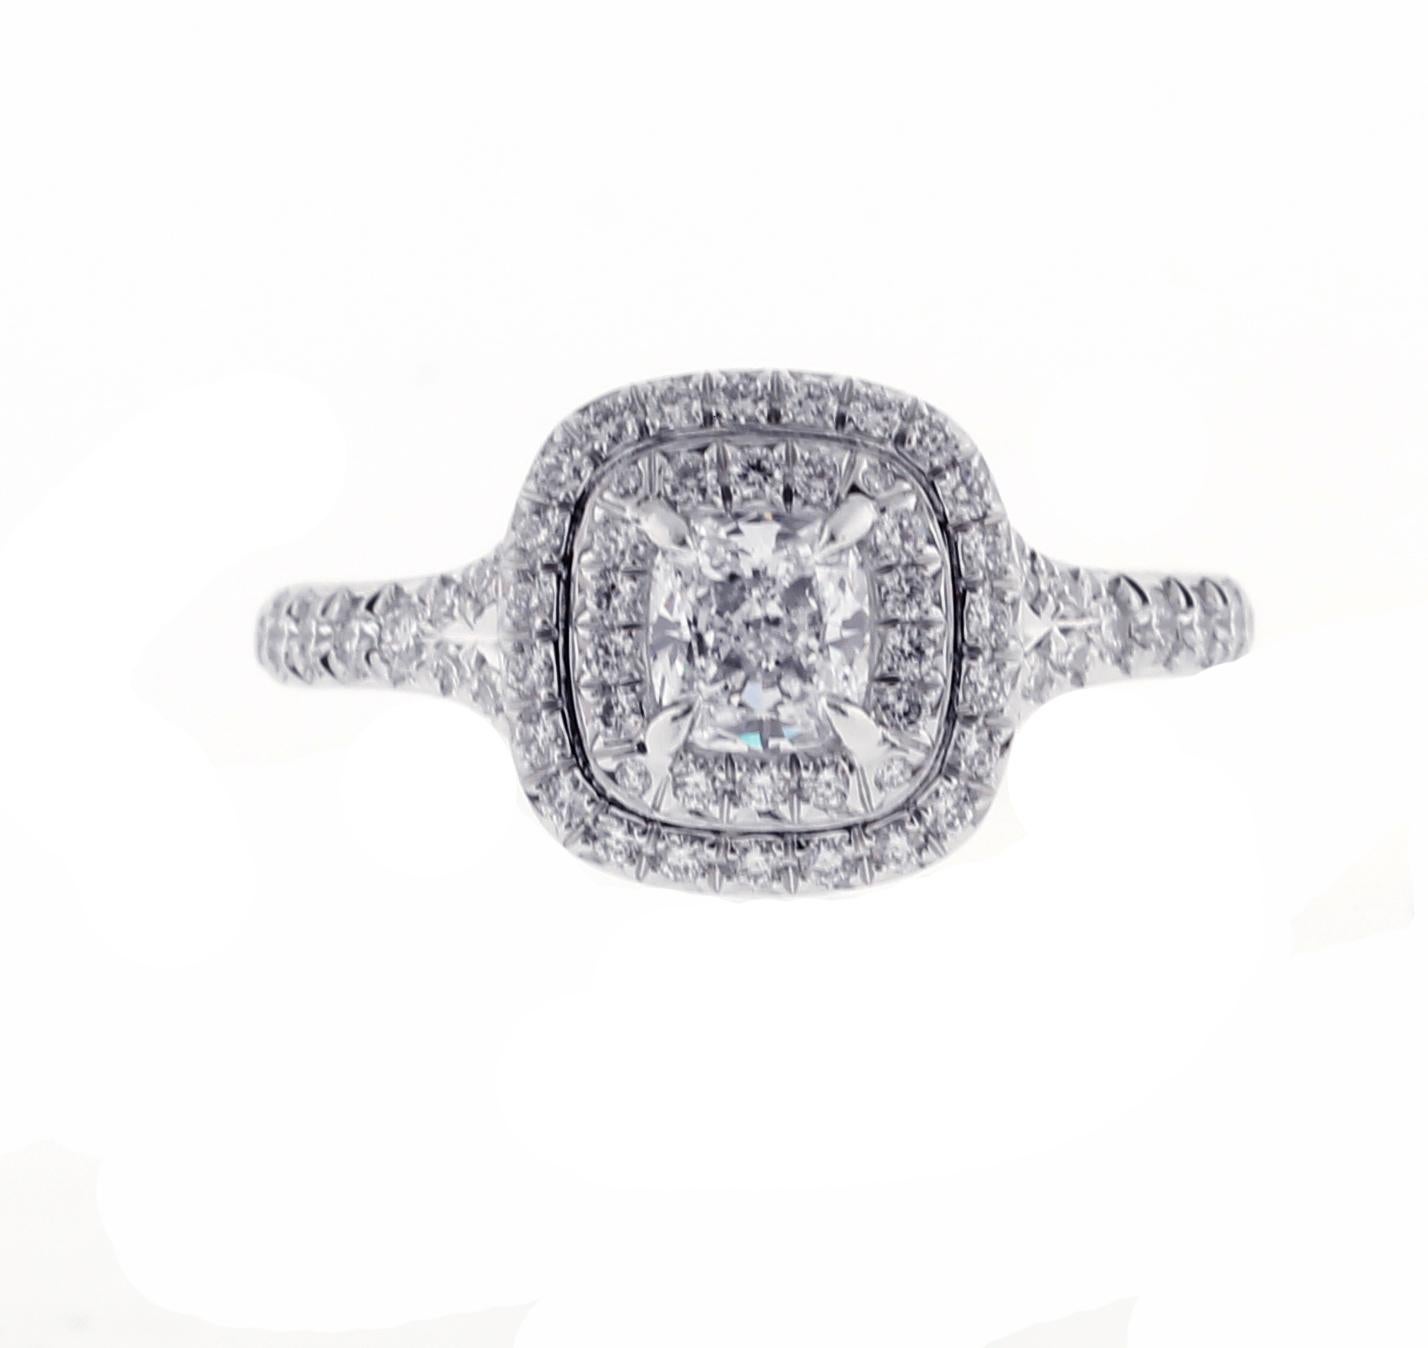 Tiffany Soleste engagement ring. With a scintillating double halo of brilliant diamonds and a striking cushion-cut center stone, light is gathered and mirrored throughout the design, resulting in an unrivaled display of brilliance. Both the ring and